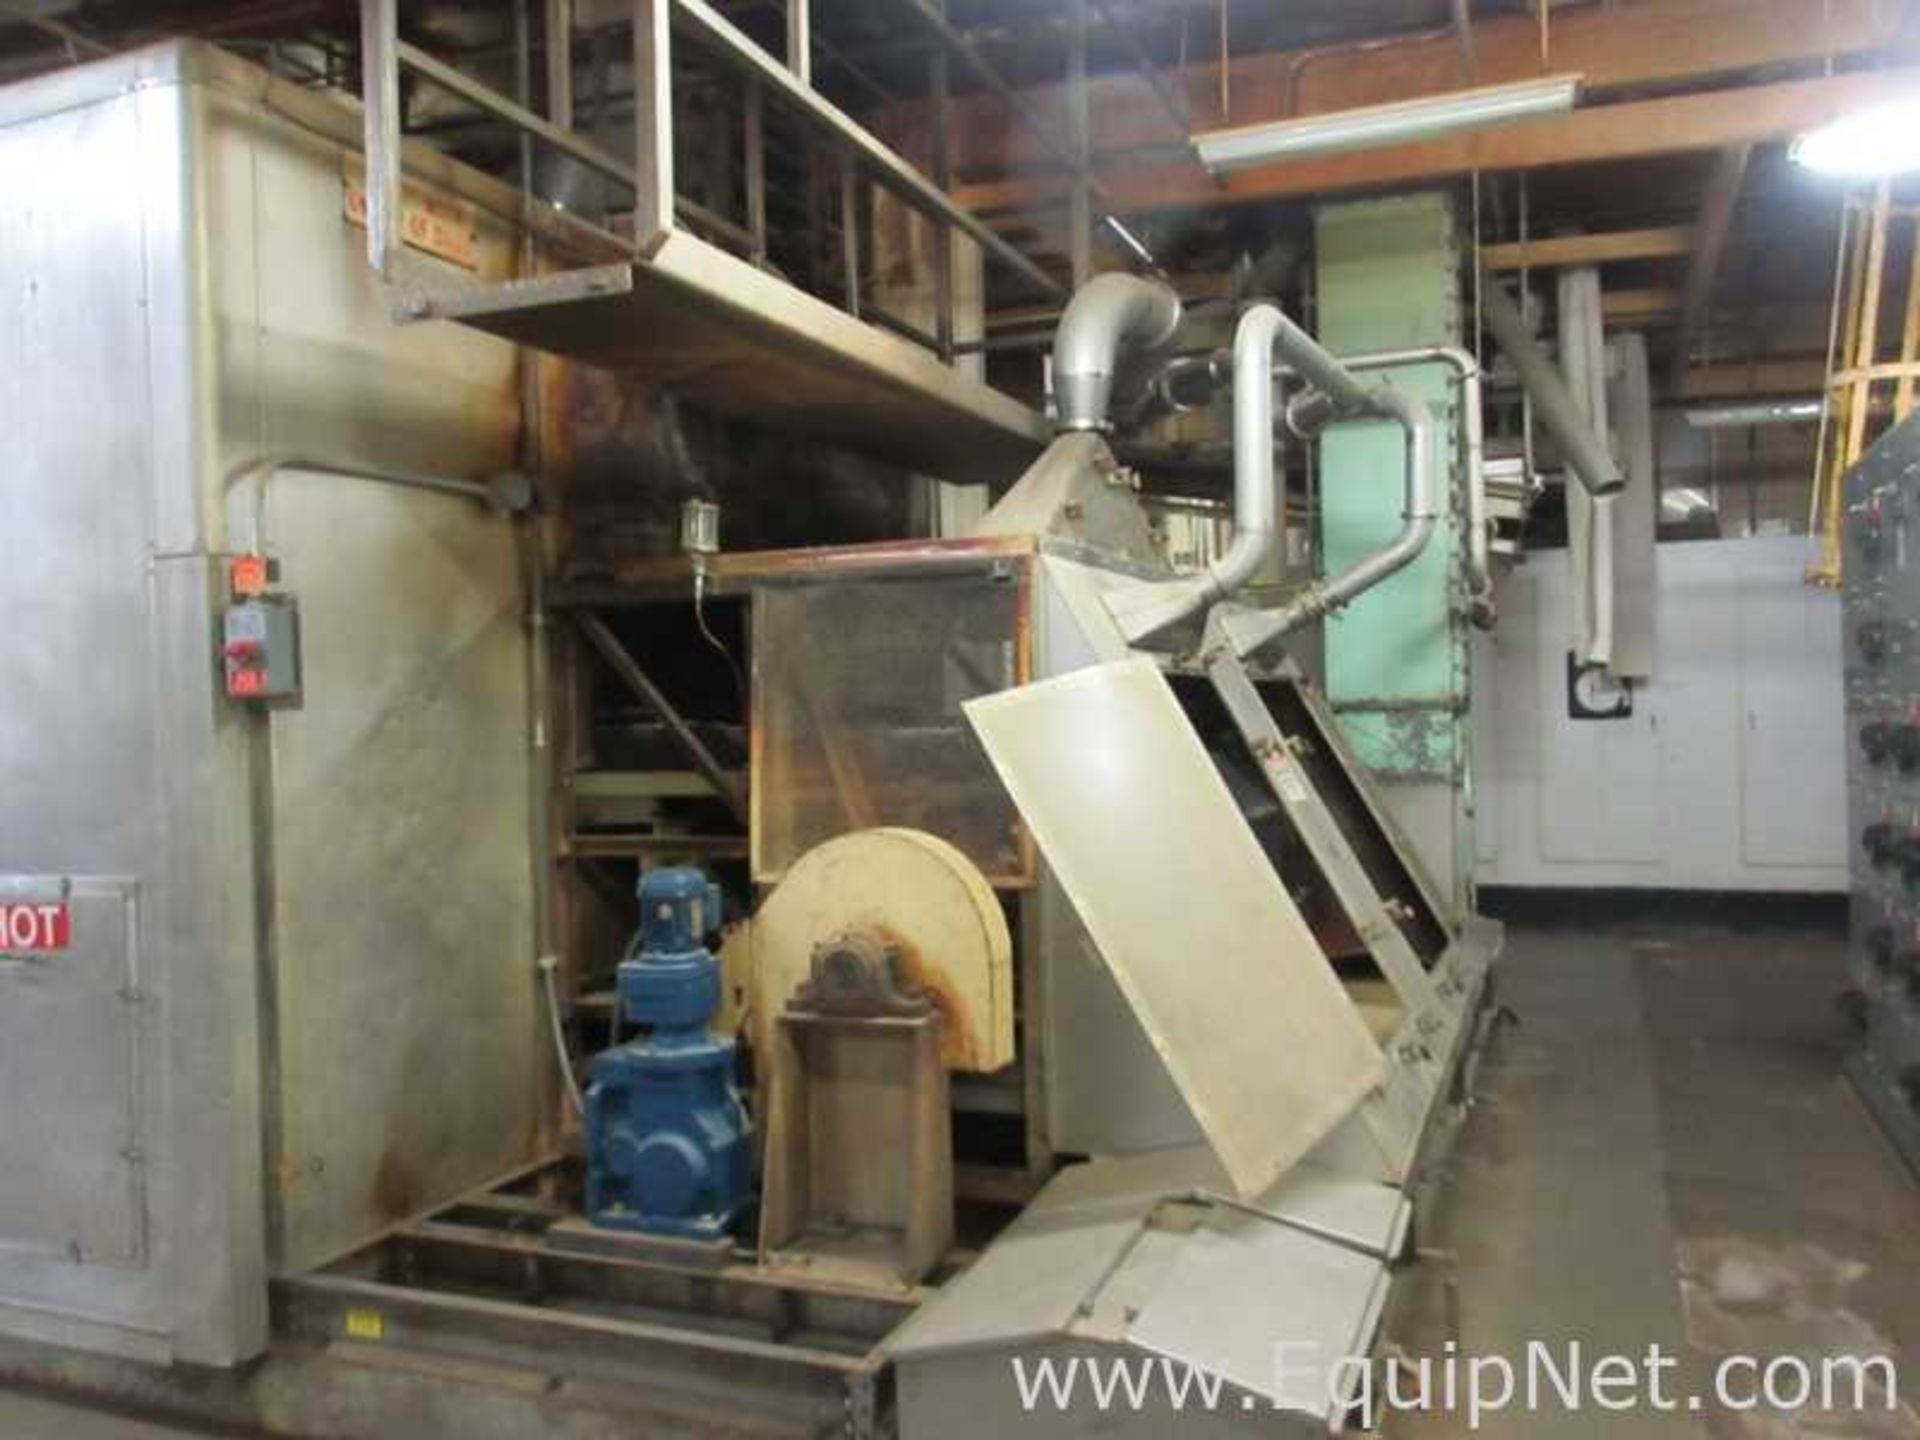 EQUIPNET LISTING #597061; REMOVAL COST: $0; DESCRIPTION: National Drying Machinery Belt - Image 4 of 27